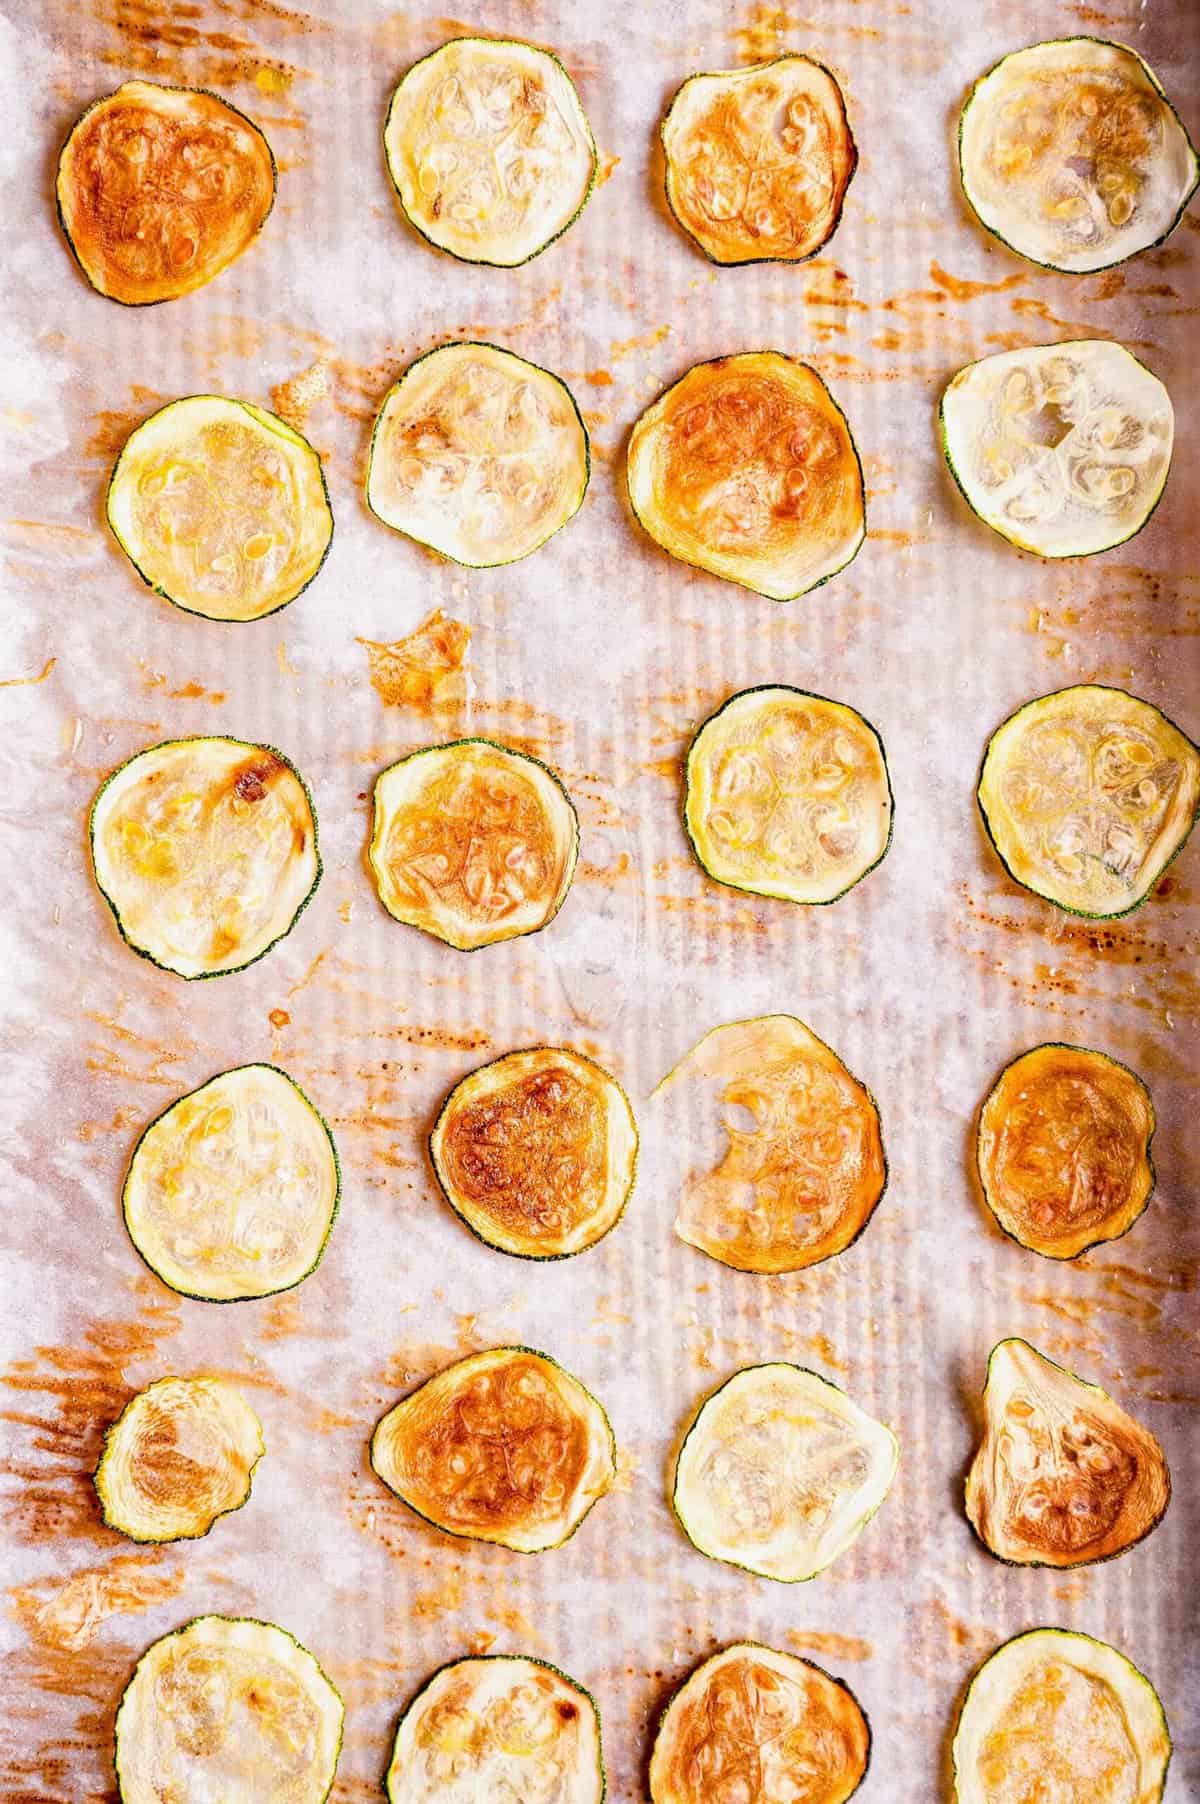 Overhead view of zucchini chips on parchment-lined baking sheet